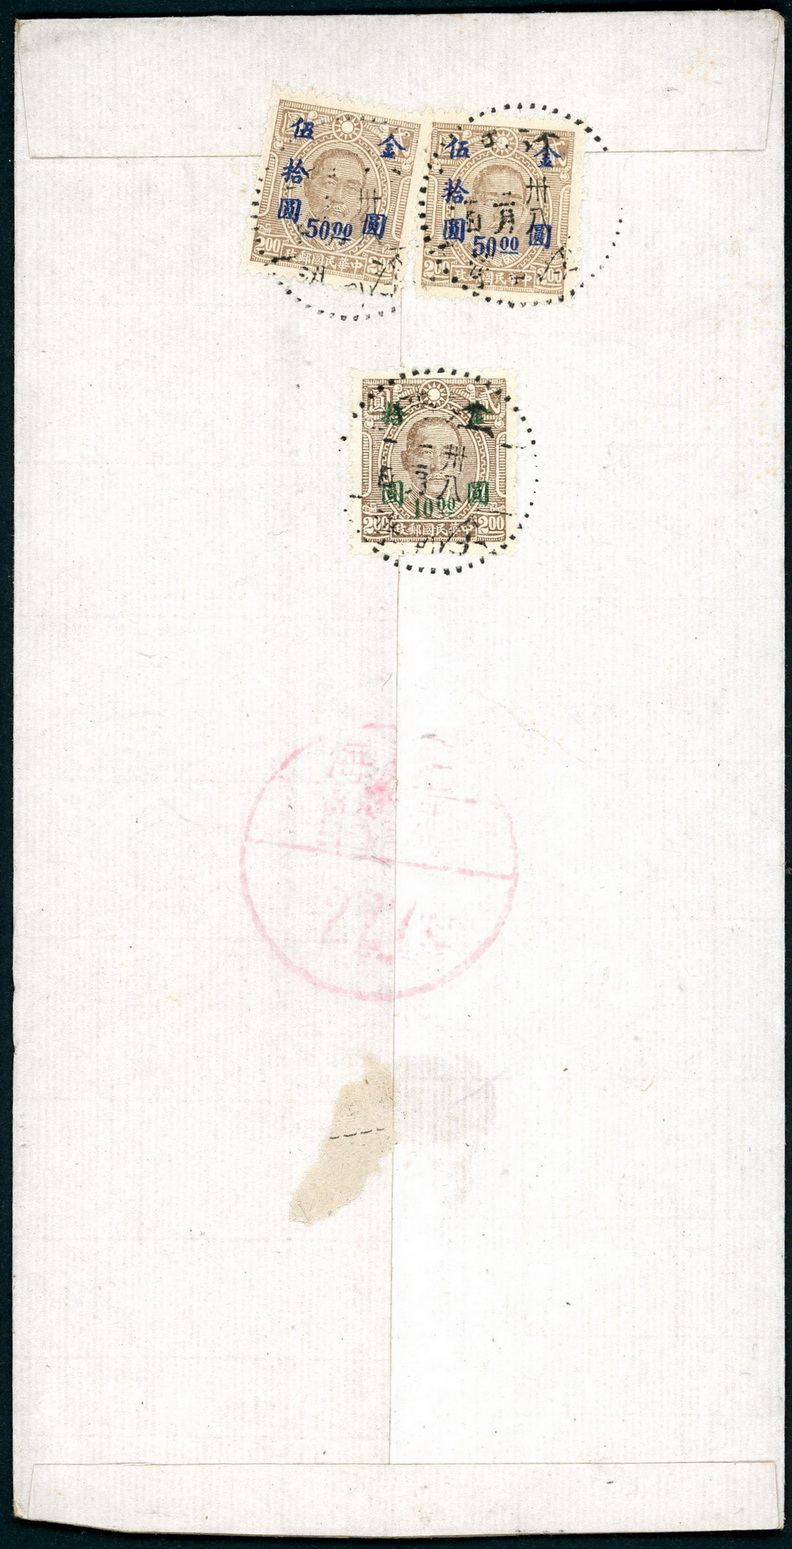 1949 Mar. 5 Fuliang registered franked with Sc. 873, 877 (x2), to Shanghai (3/8/1949), overpaid by $5 (2 images)